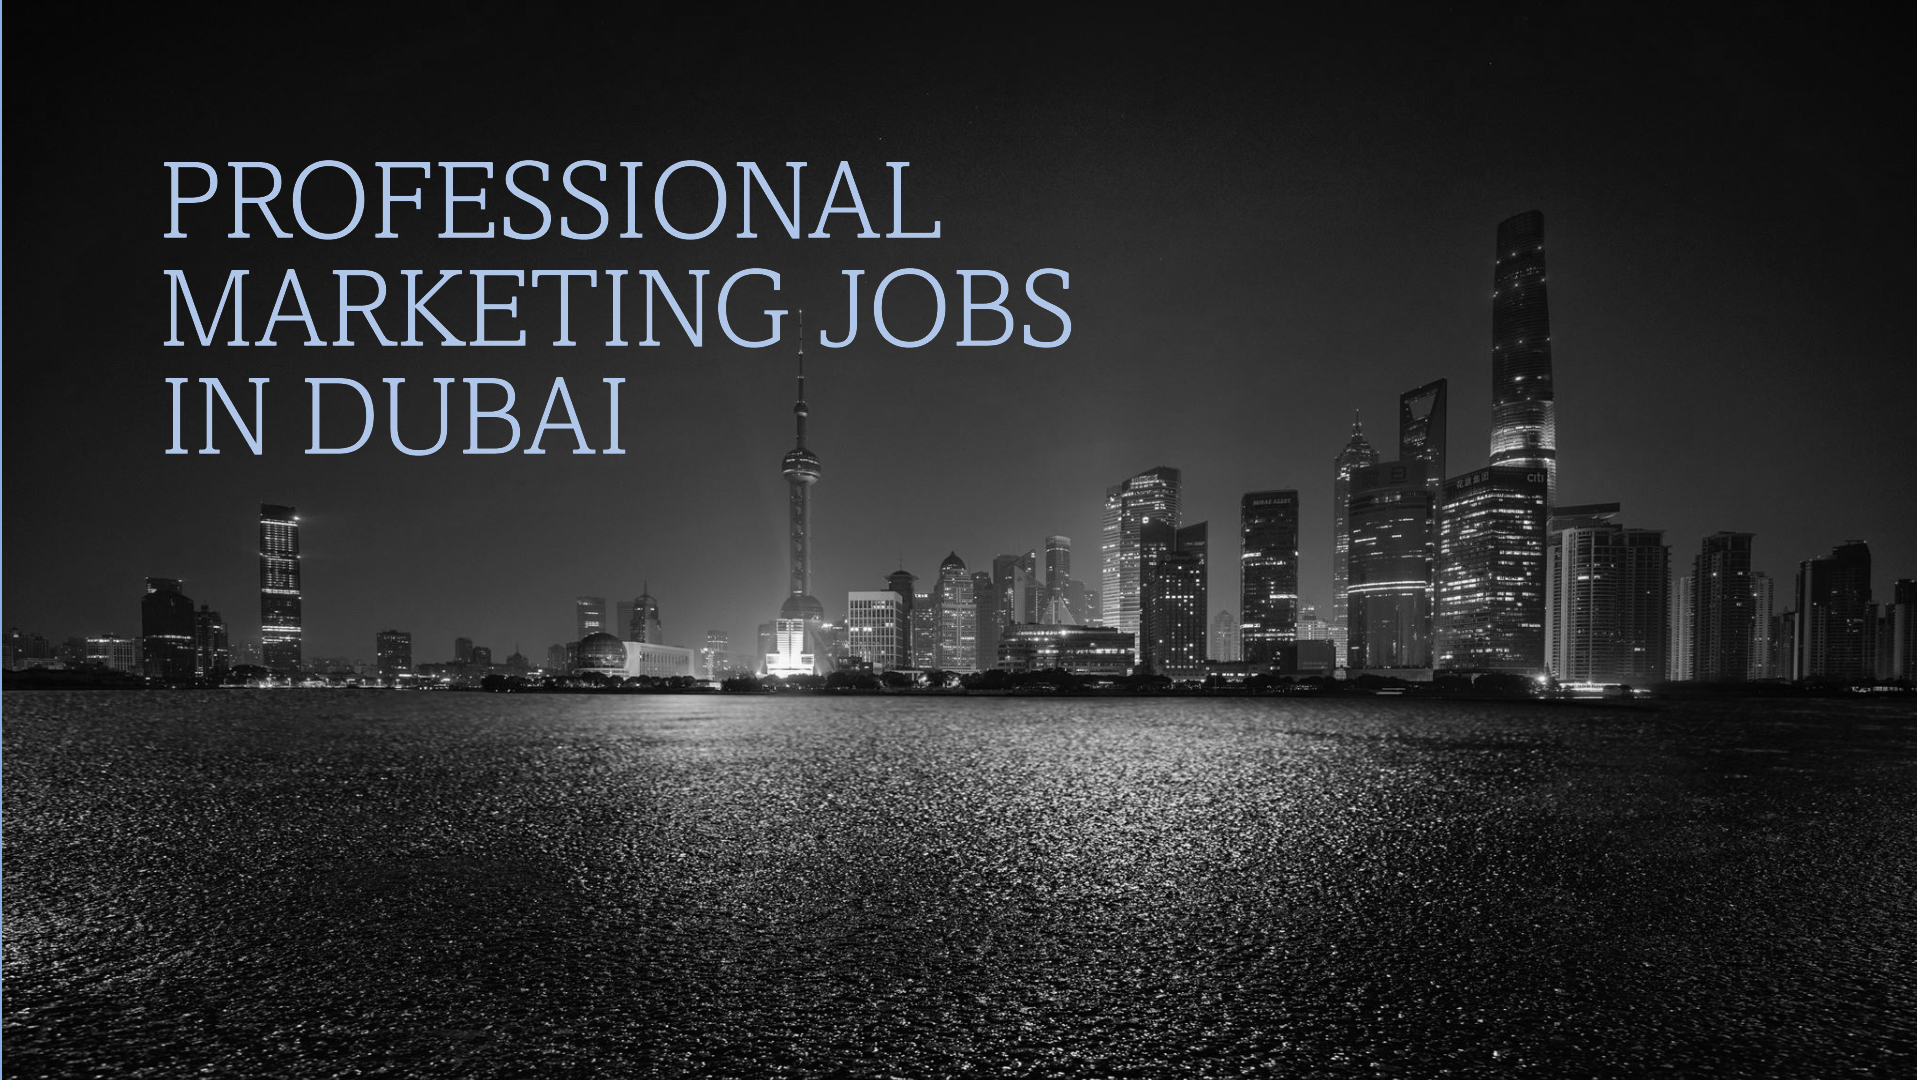 Marketing jobs in Dubai for all nationalities